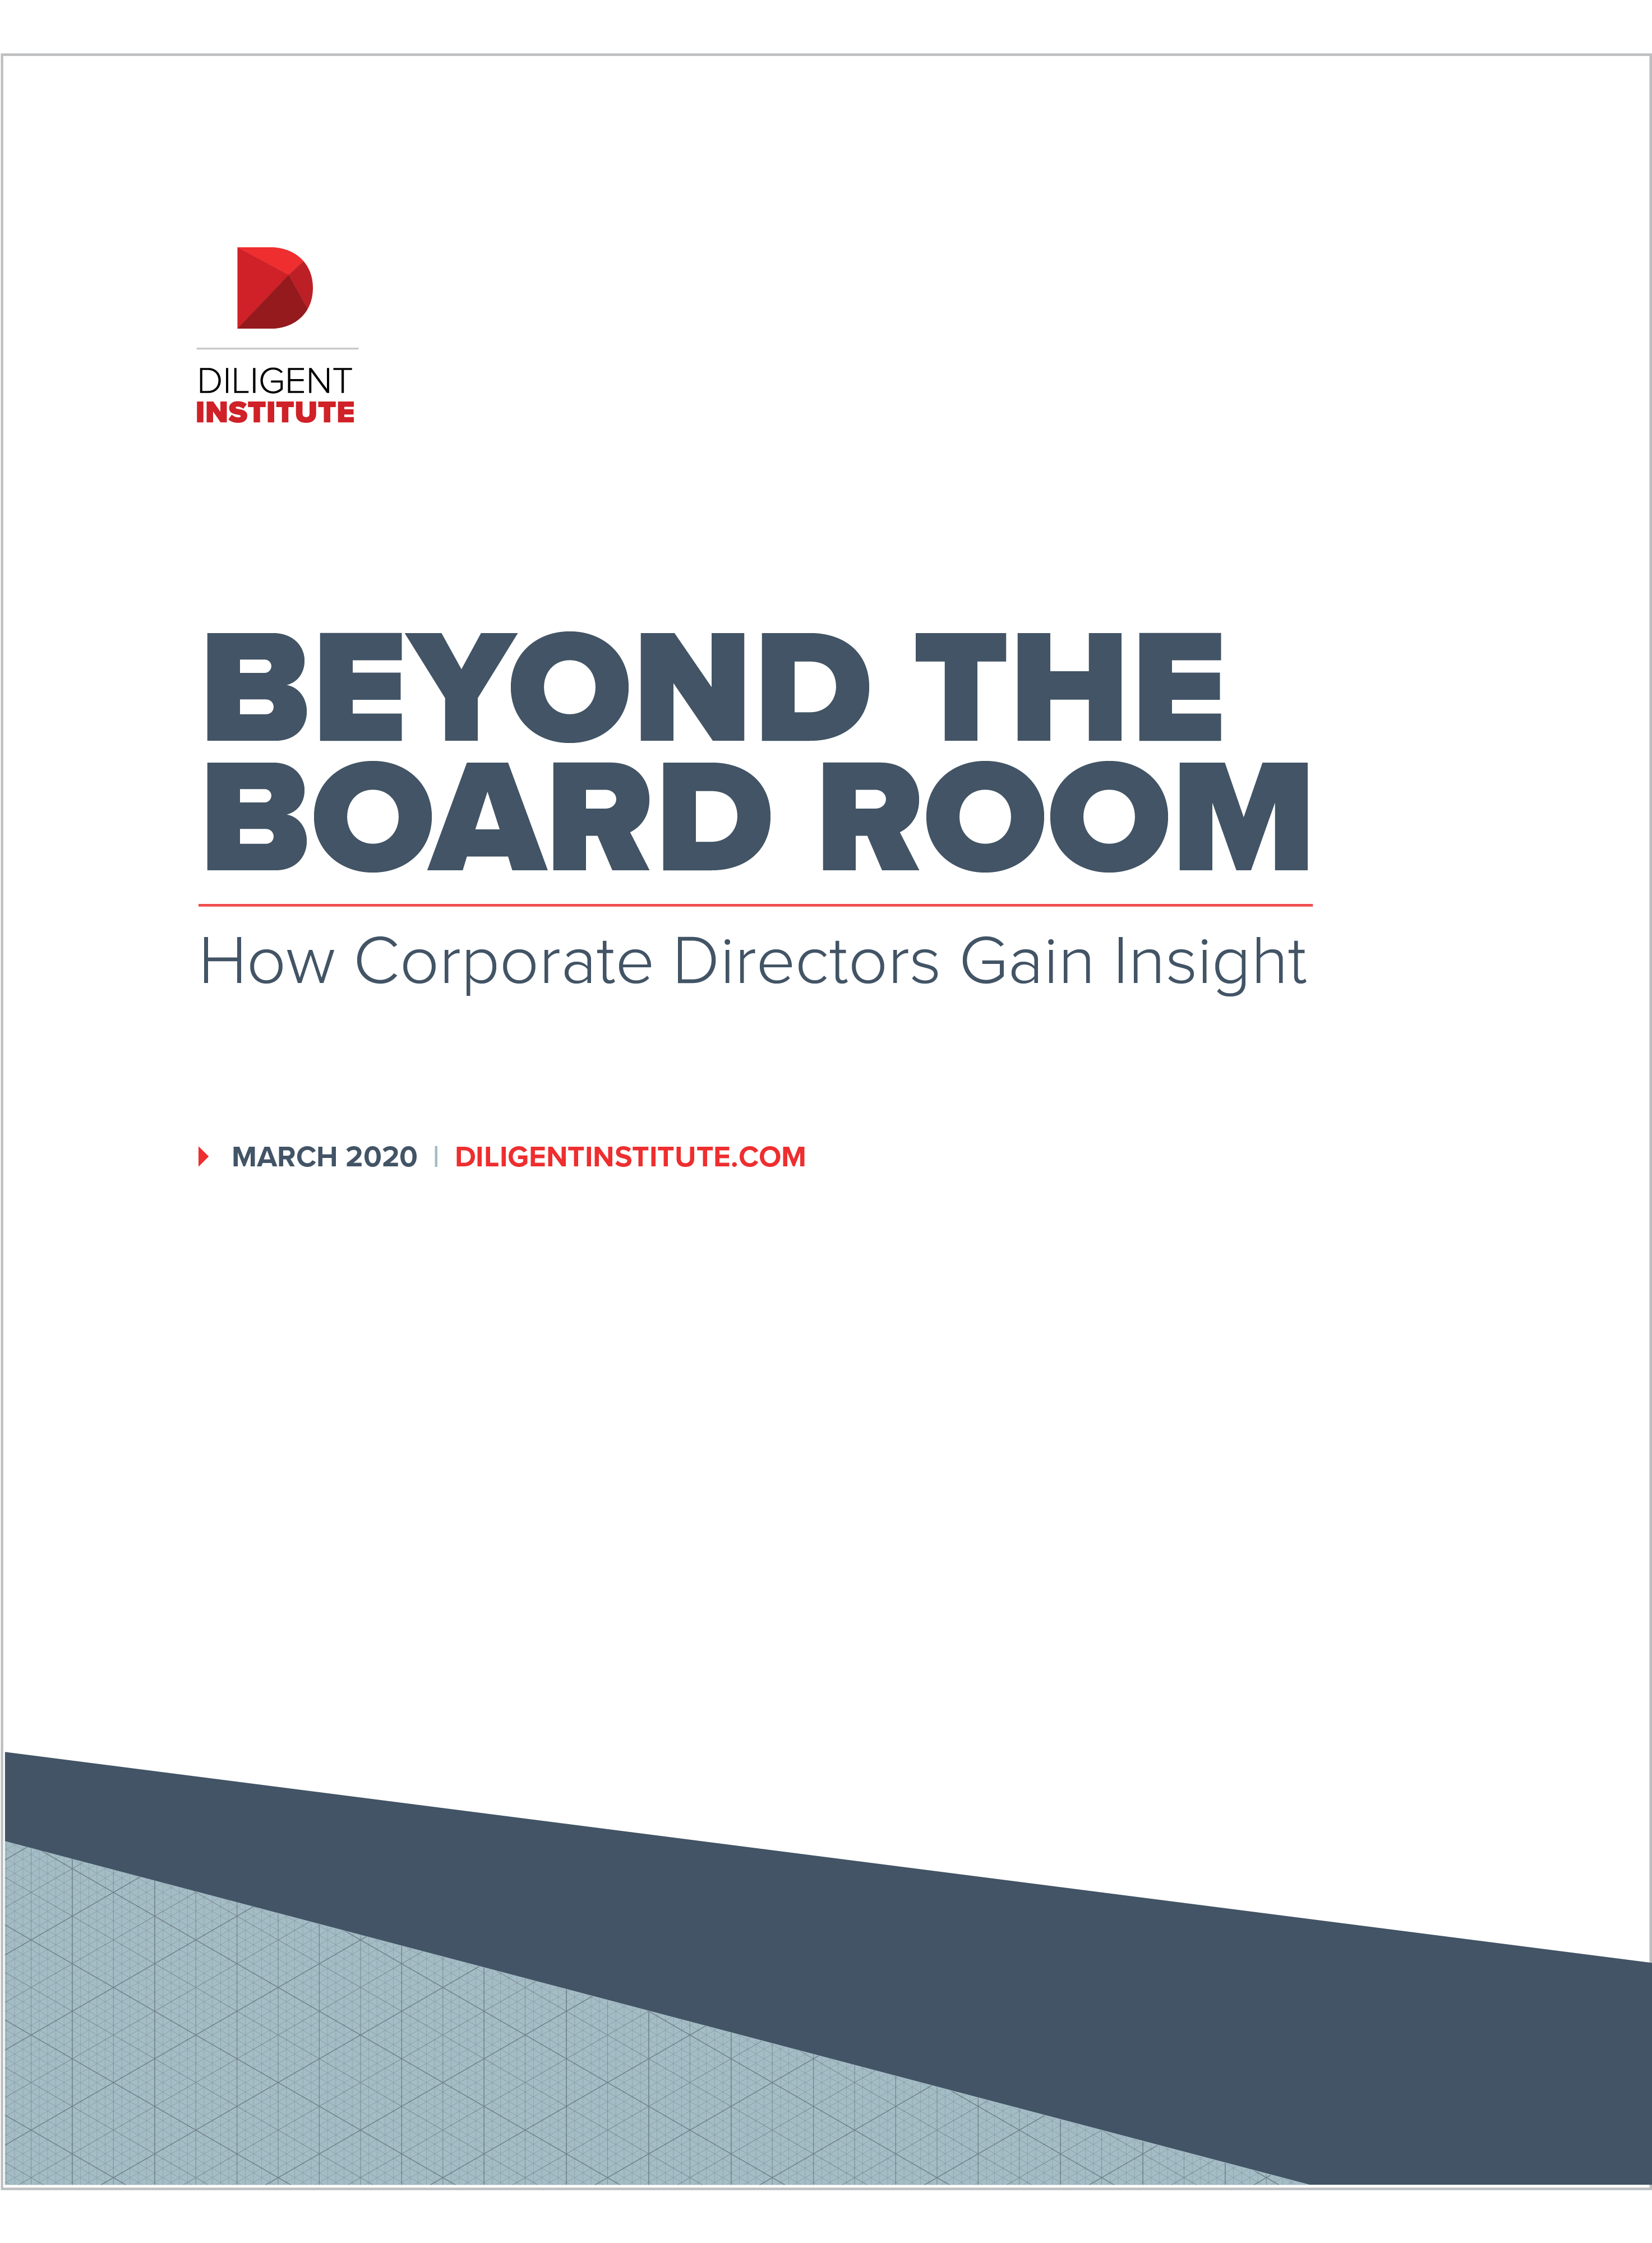 Beyond the boardroom: how corporate directors gain insight report